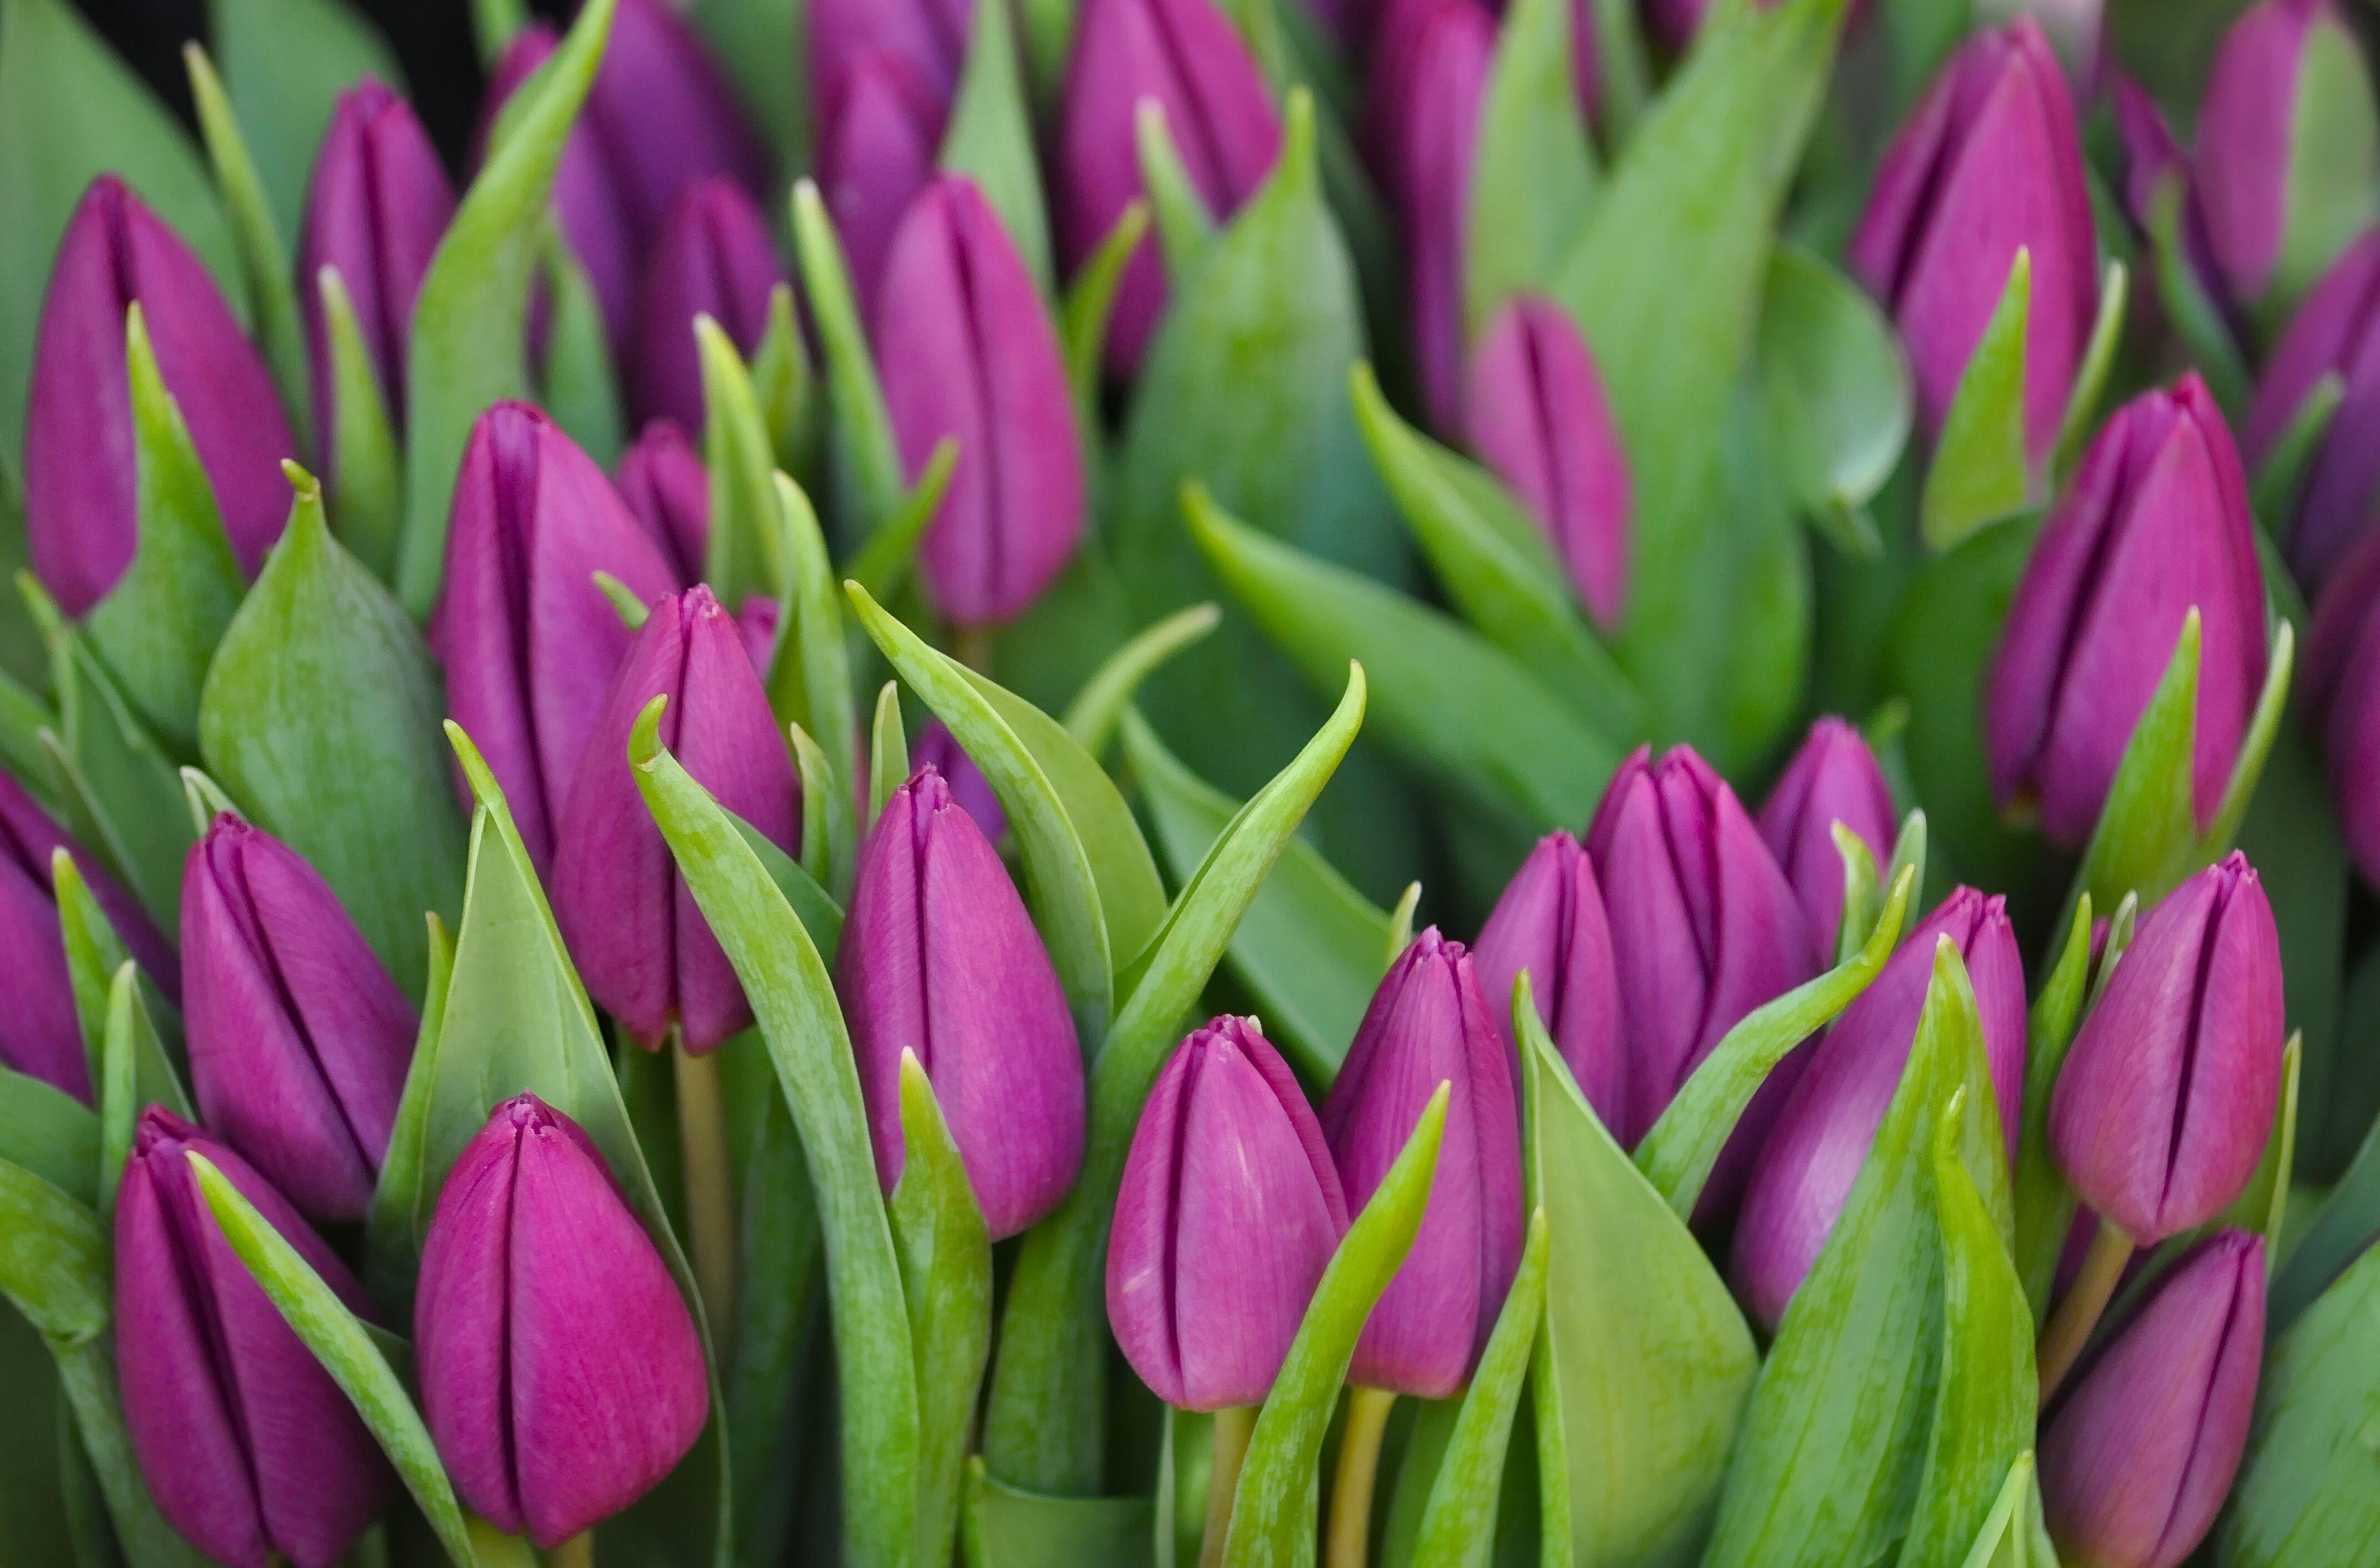 greens, flowers, lilac, tulips, bouquet, purple, buds